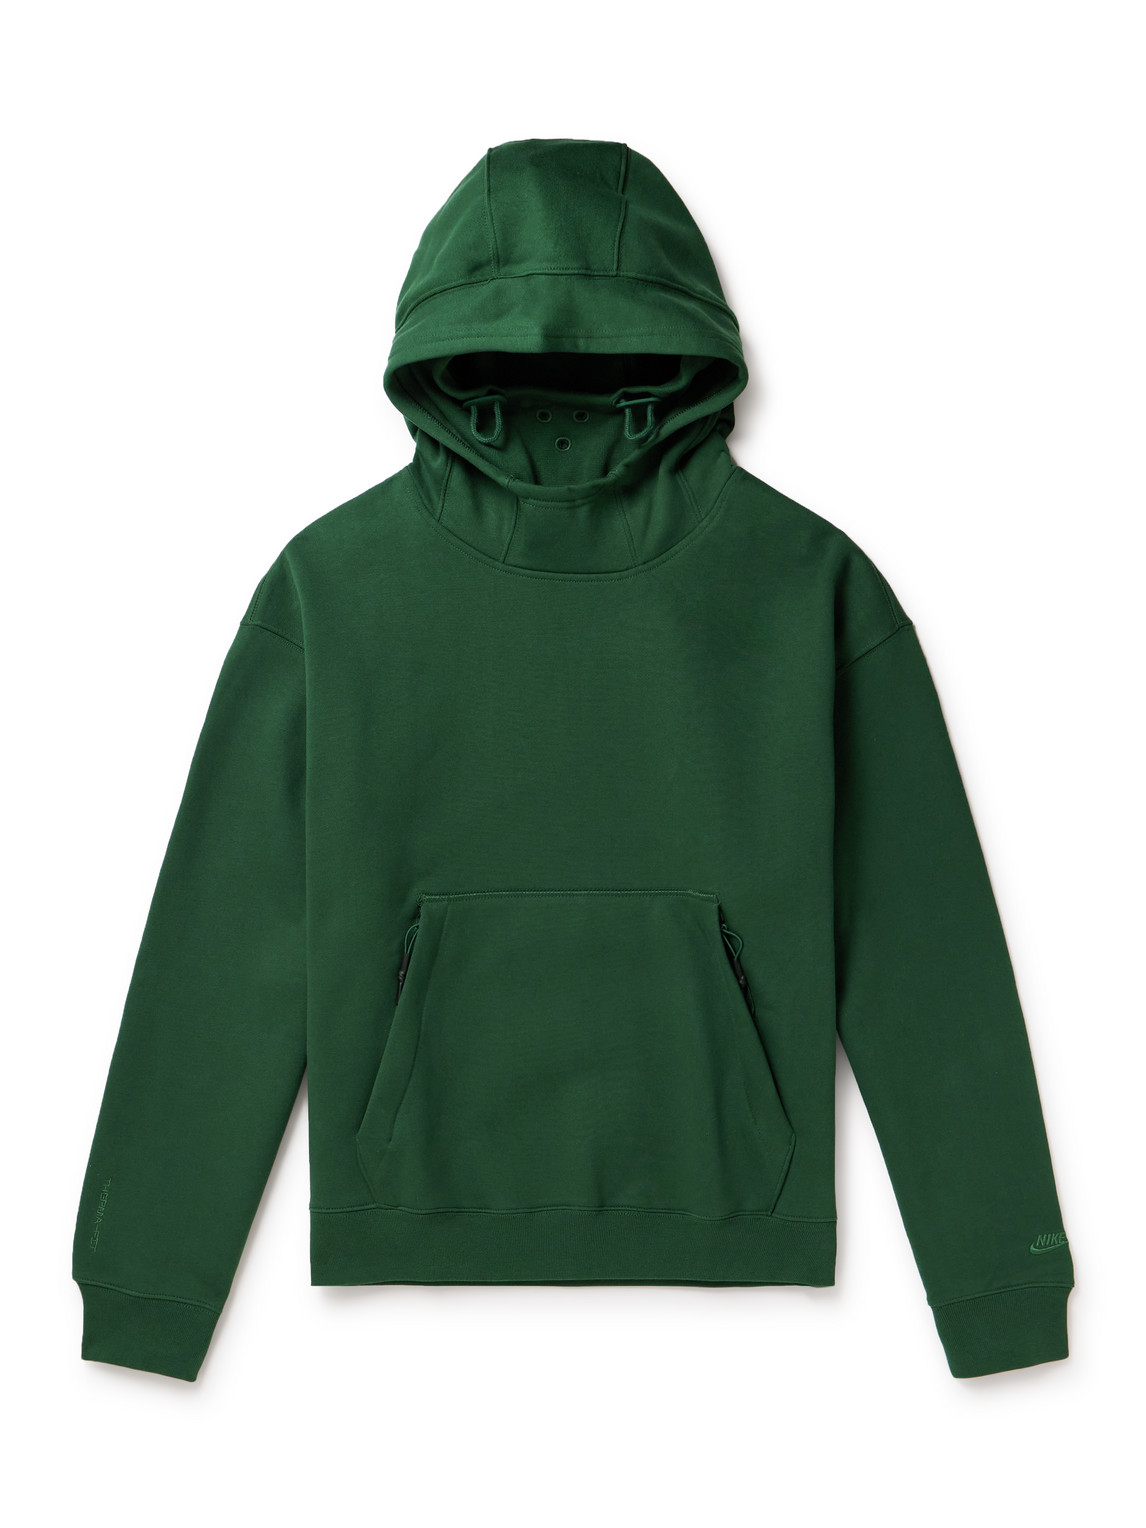 NSW Winter Repel Cotton-Blend Jersey Hoodie